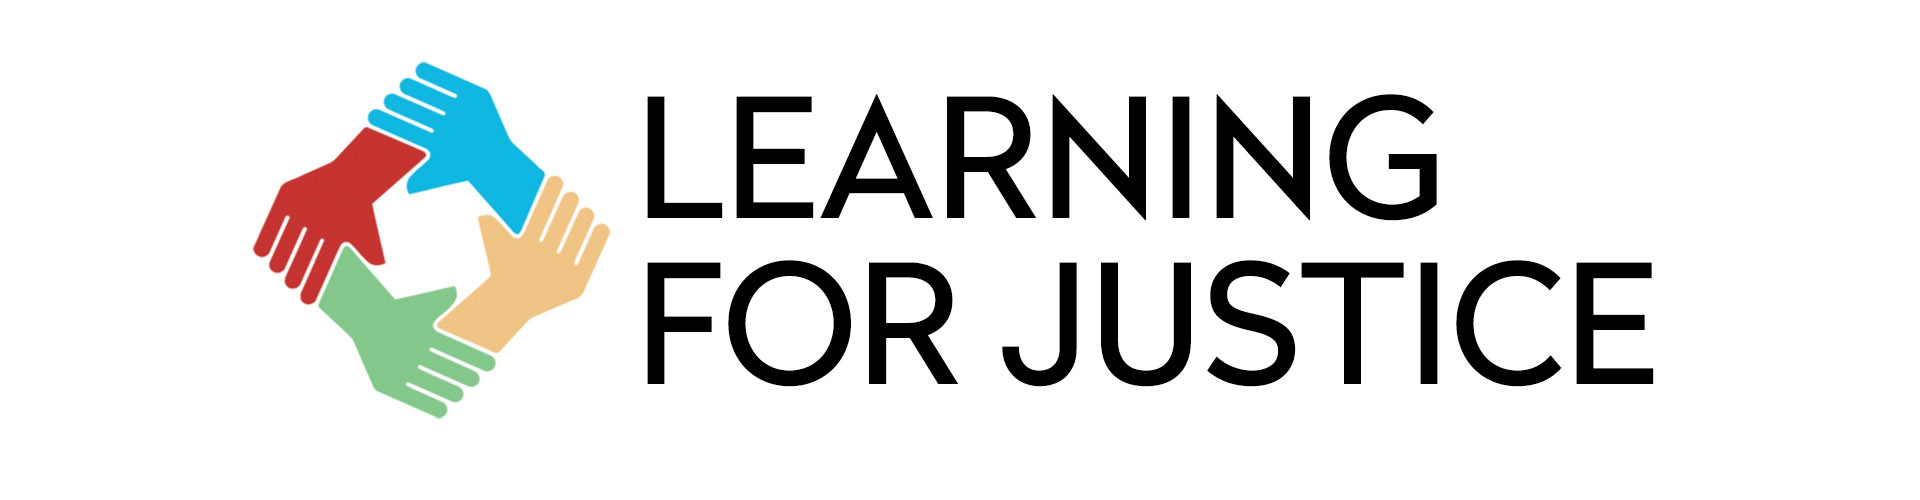 Image for Learning For Justice: A Project of the Southern Poverty Law Center